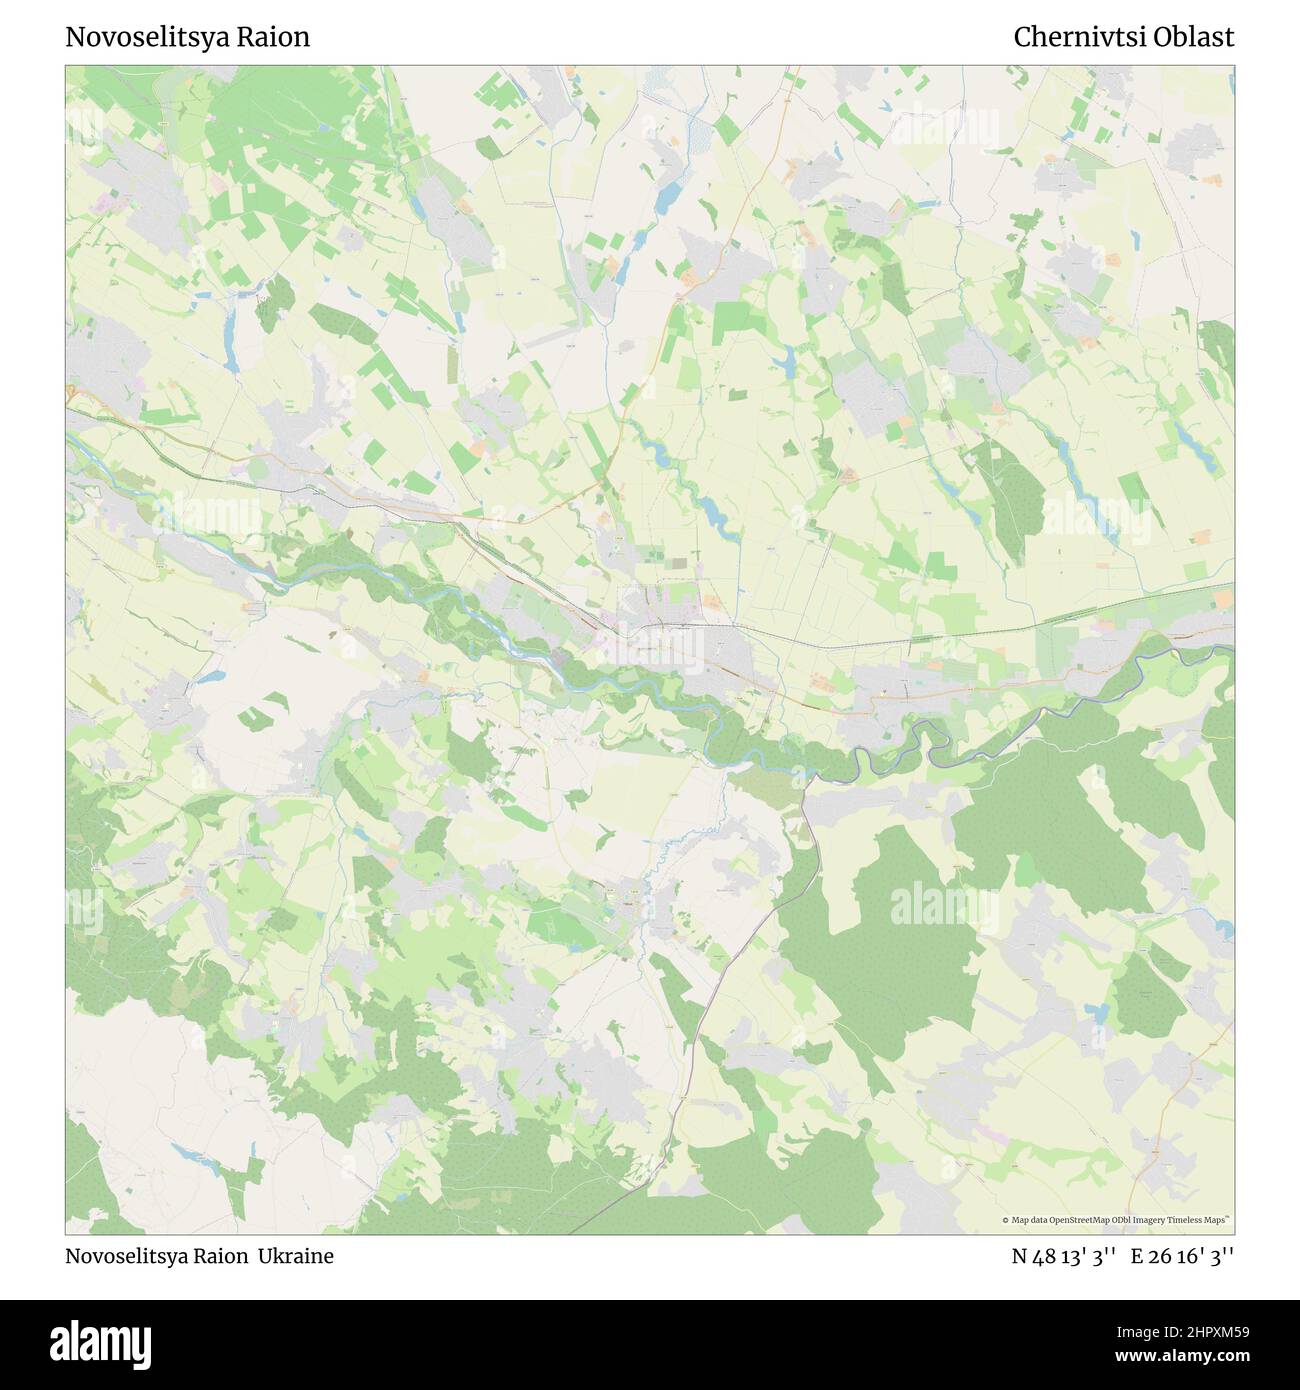 Novoselitsya Raion, Novoselitsya Raion, Ukraine, Chernivtsi Oblast, N 48 13' 3'', E 26 16' 3'', map, Timeless Map published in 2021. Travelers, explorers and adventurers like Florence Nightingale, David Livingstone, Ernest Shackleton, Lewis and Clark and Sherlock Holmes relied on maps to plan travels to the world's most remote corners, Timeless Maps is mapping most locations on the globe, showing the achievement of great dreams Stock Photo